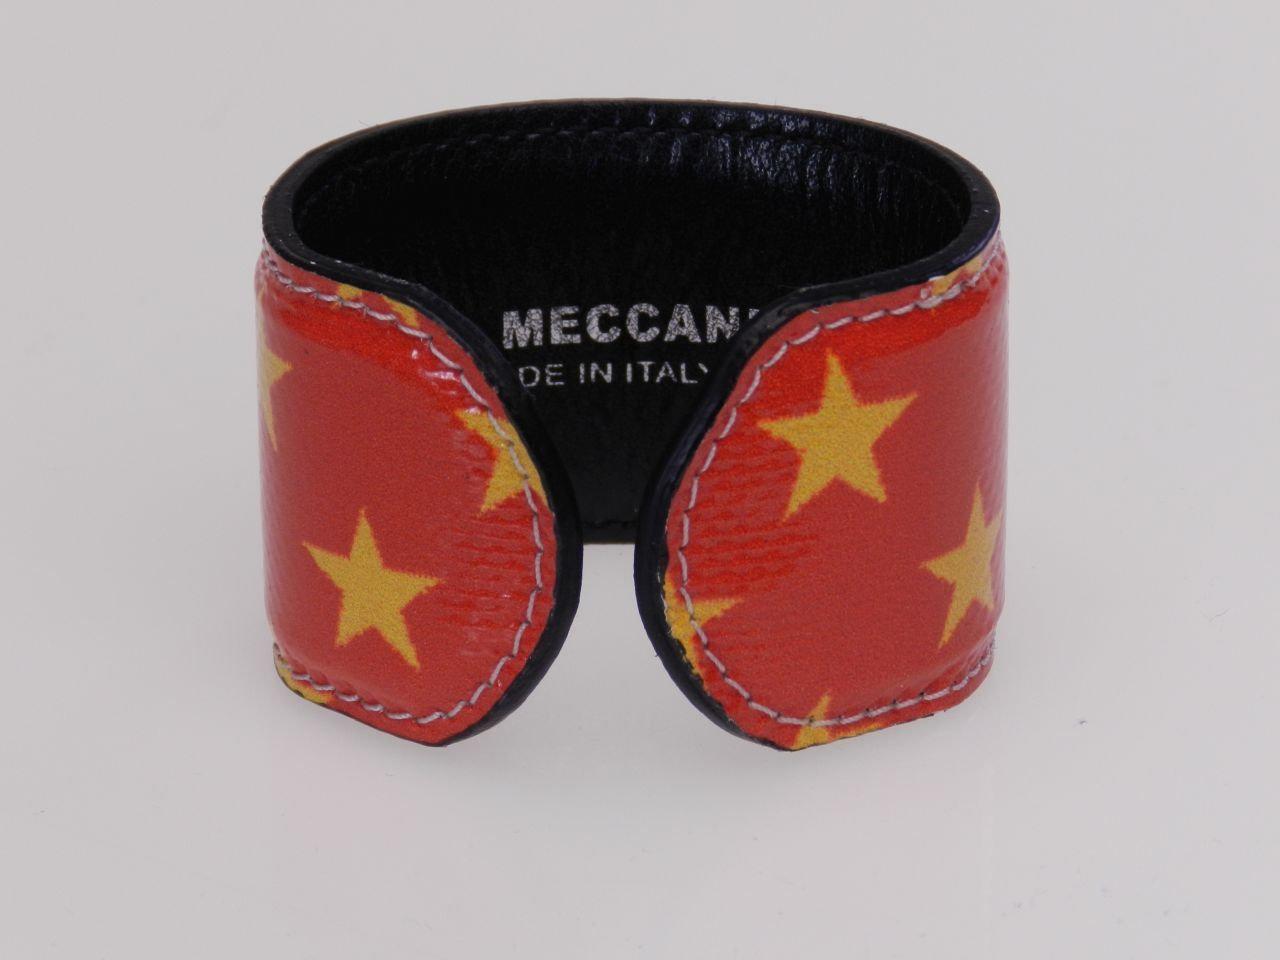 WOMAN BRACELET RED WITH STARS. - Limited Edition Paul Meccanico